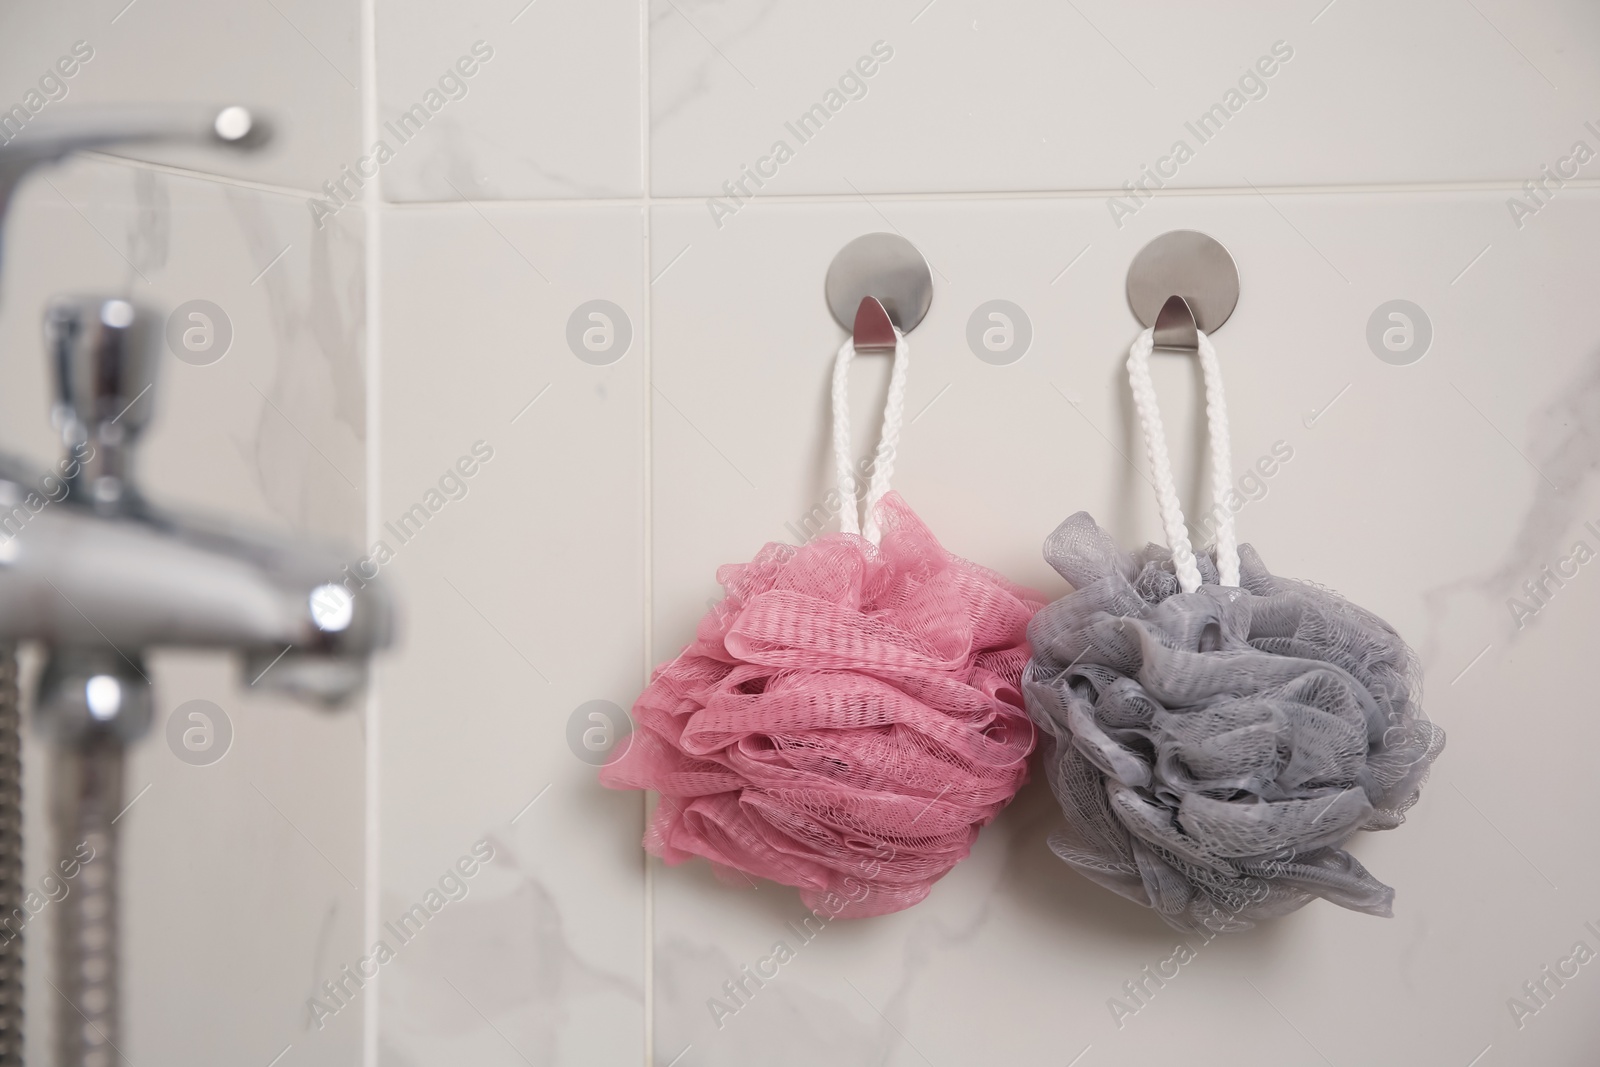 Photo of Shower puffs hanging near faucet in bathroom